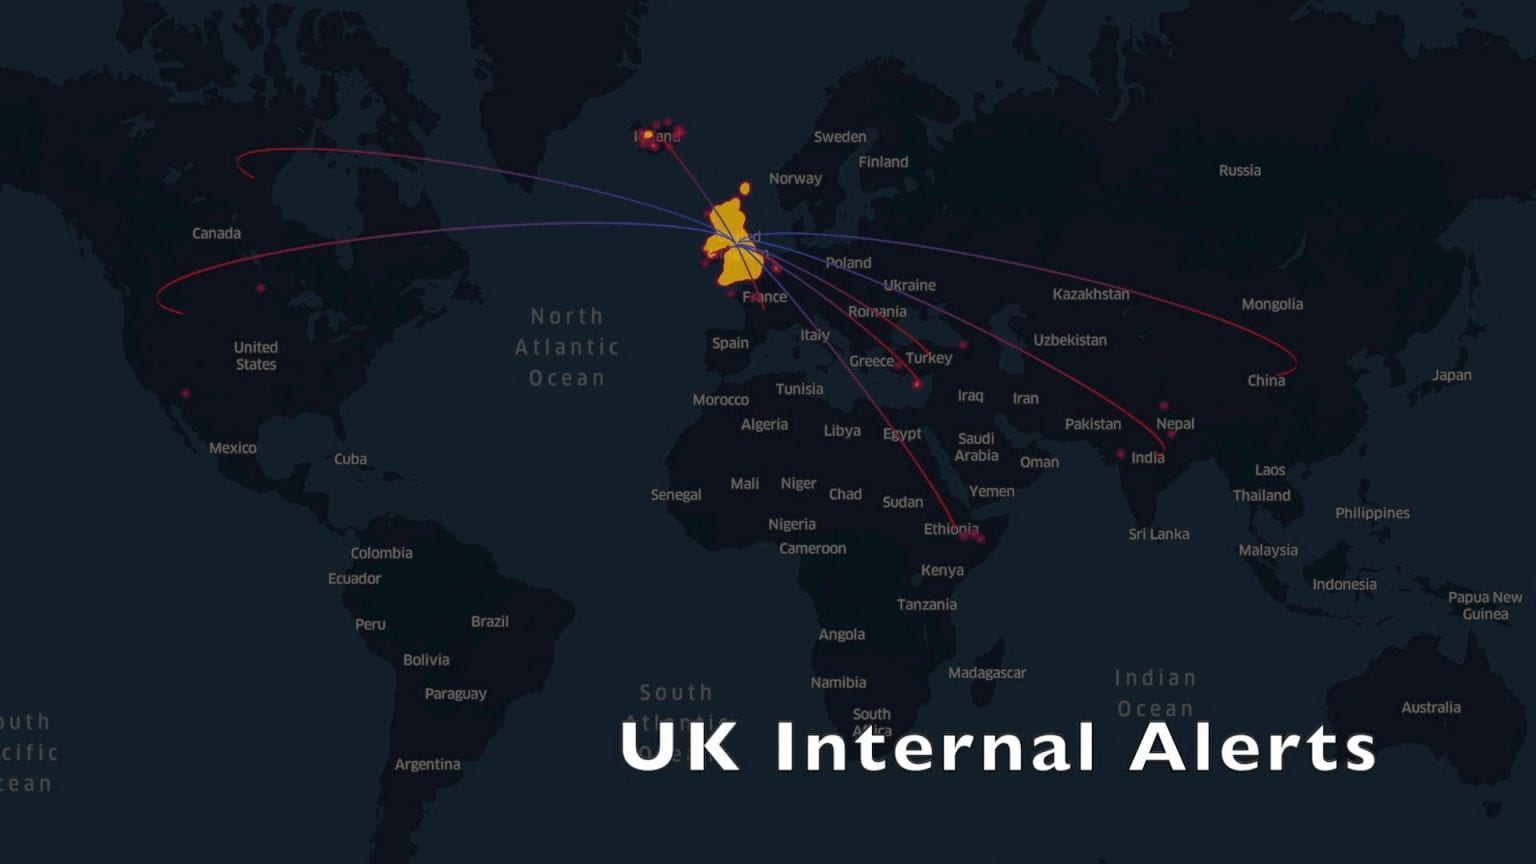 Map of the world where lines between the UK and other countries indicate the 8 countries where alerts from the UK Internal alerts have originated from